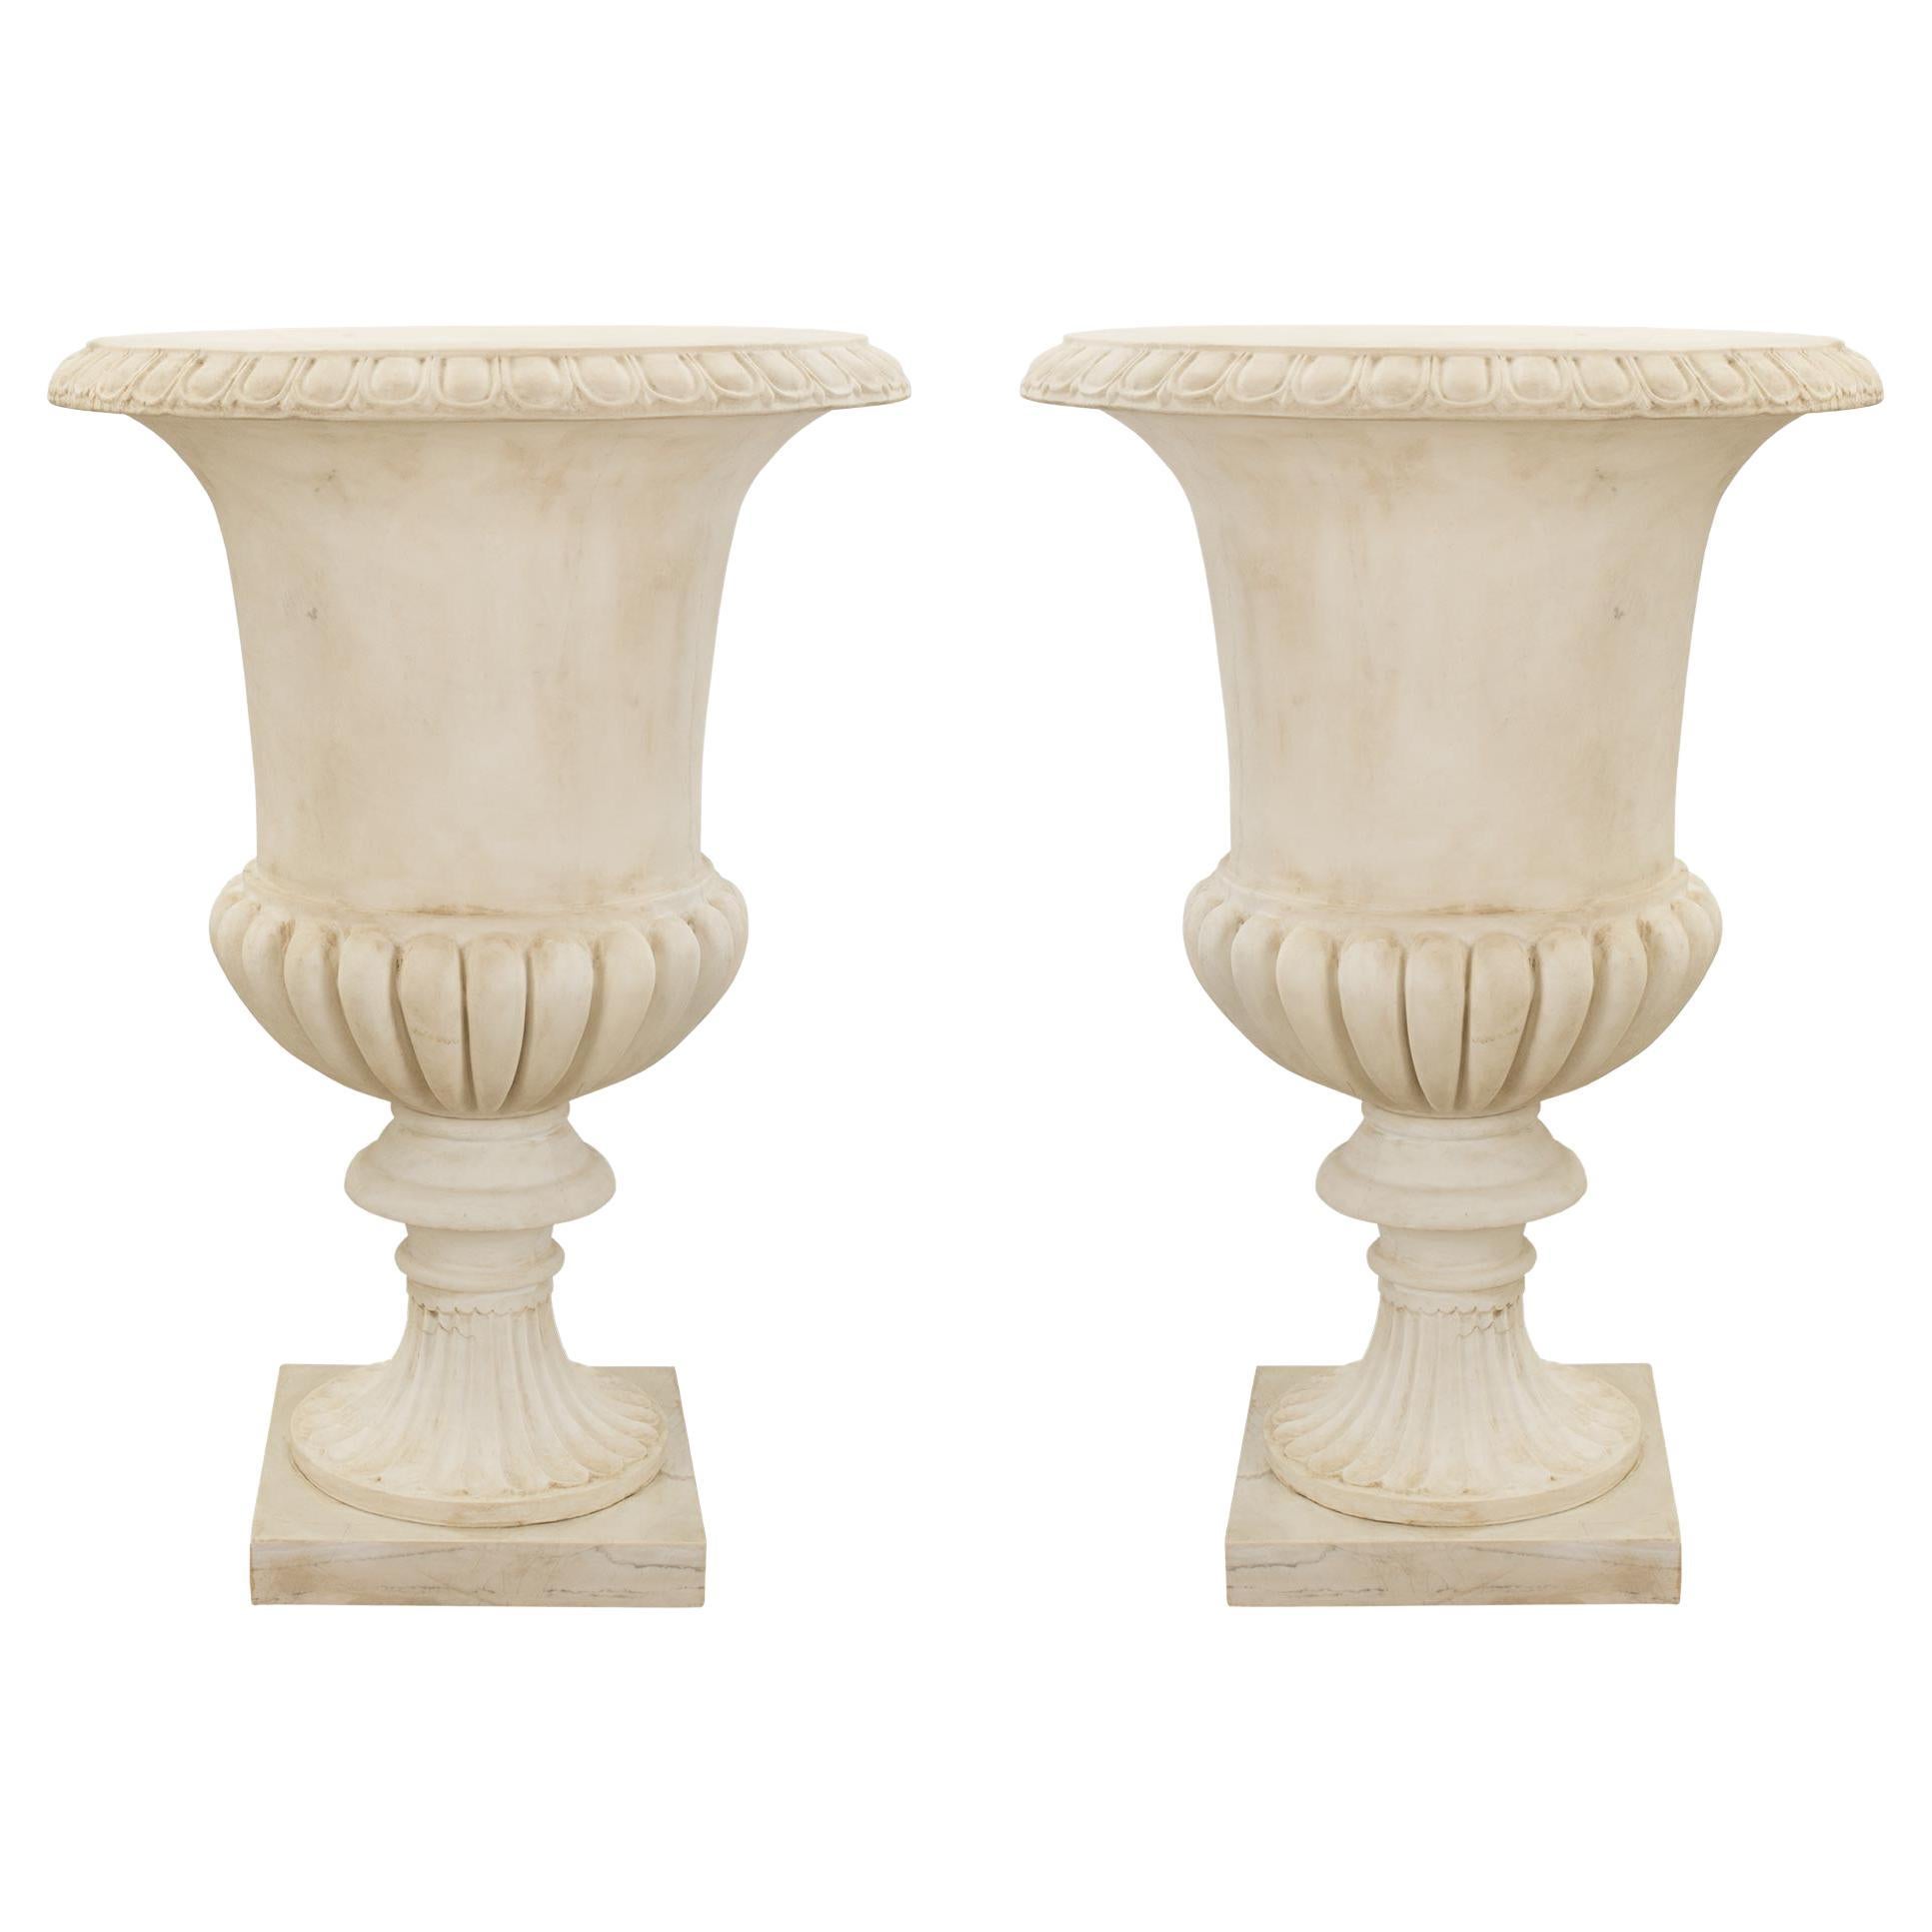 Pair of Italian 19th Century Large Scale White Carrara Marble Urns For Sale